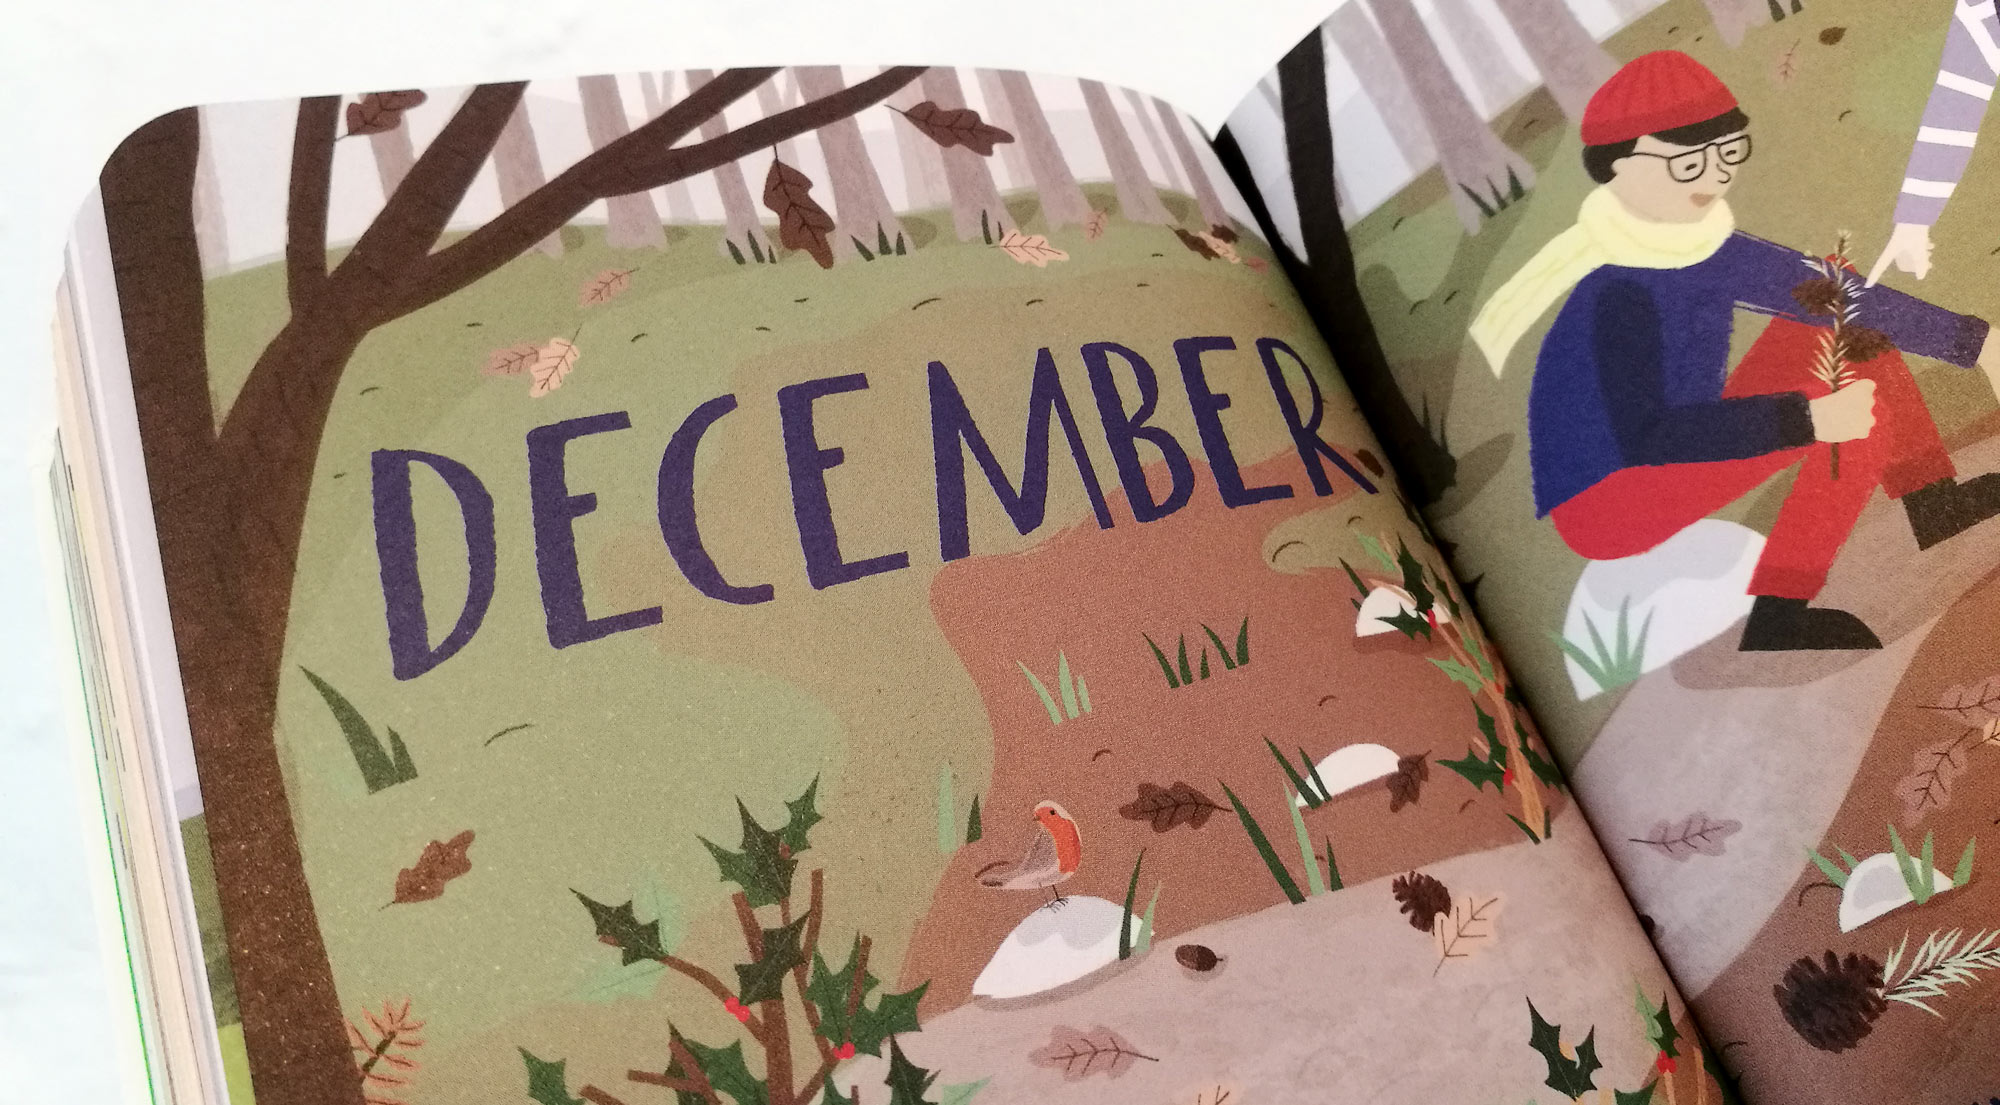 December Opening Spread from 2020 Nature Month by Month illustrated by Elly Jahnz